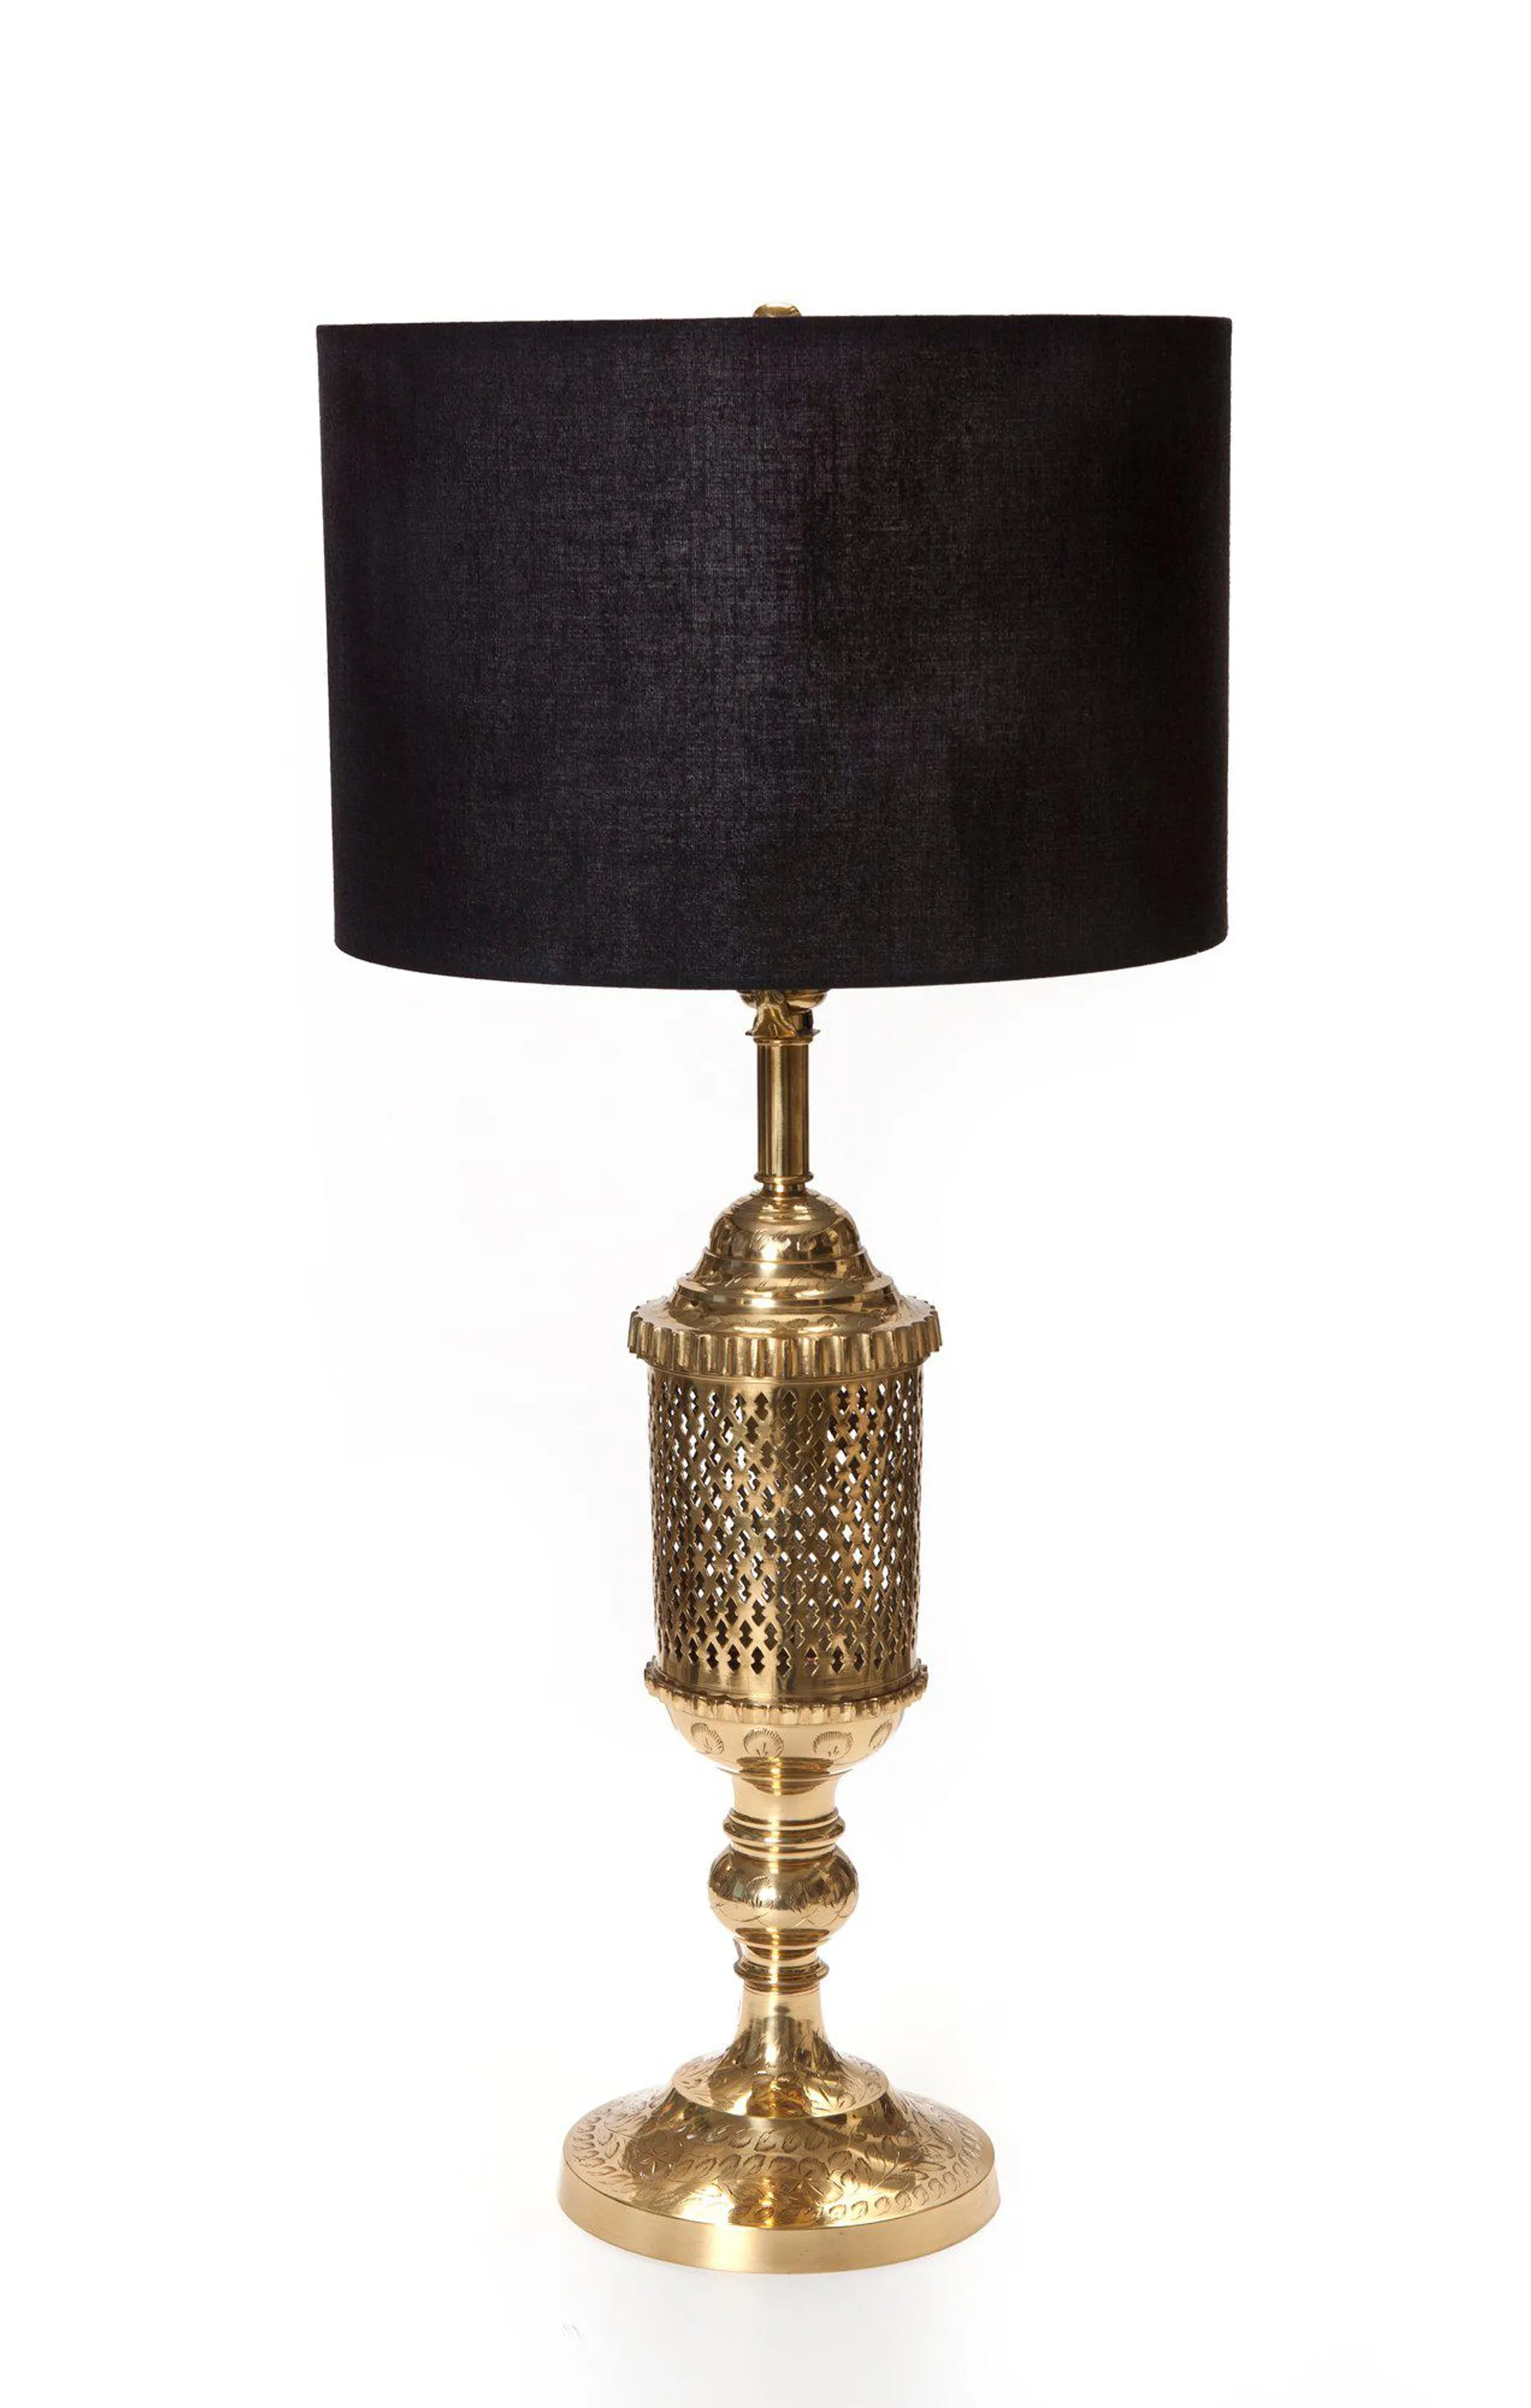 20th Century Anglo-Indian Brass Lamp